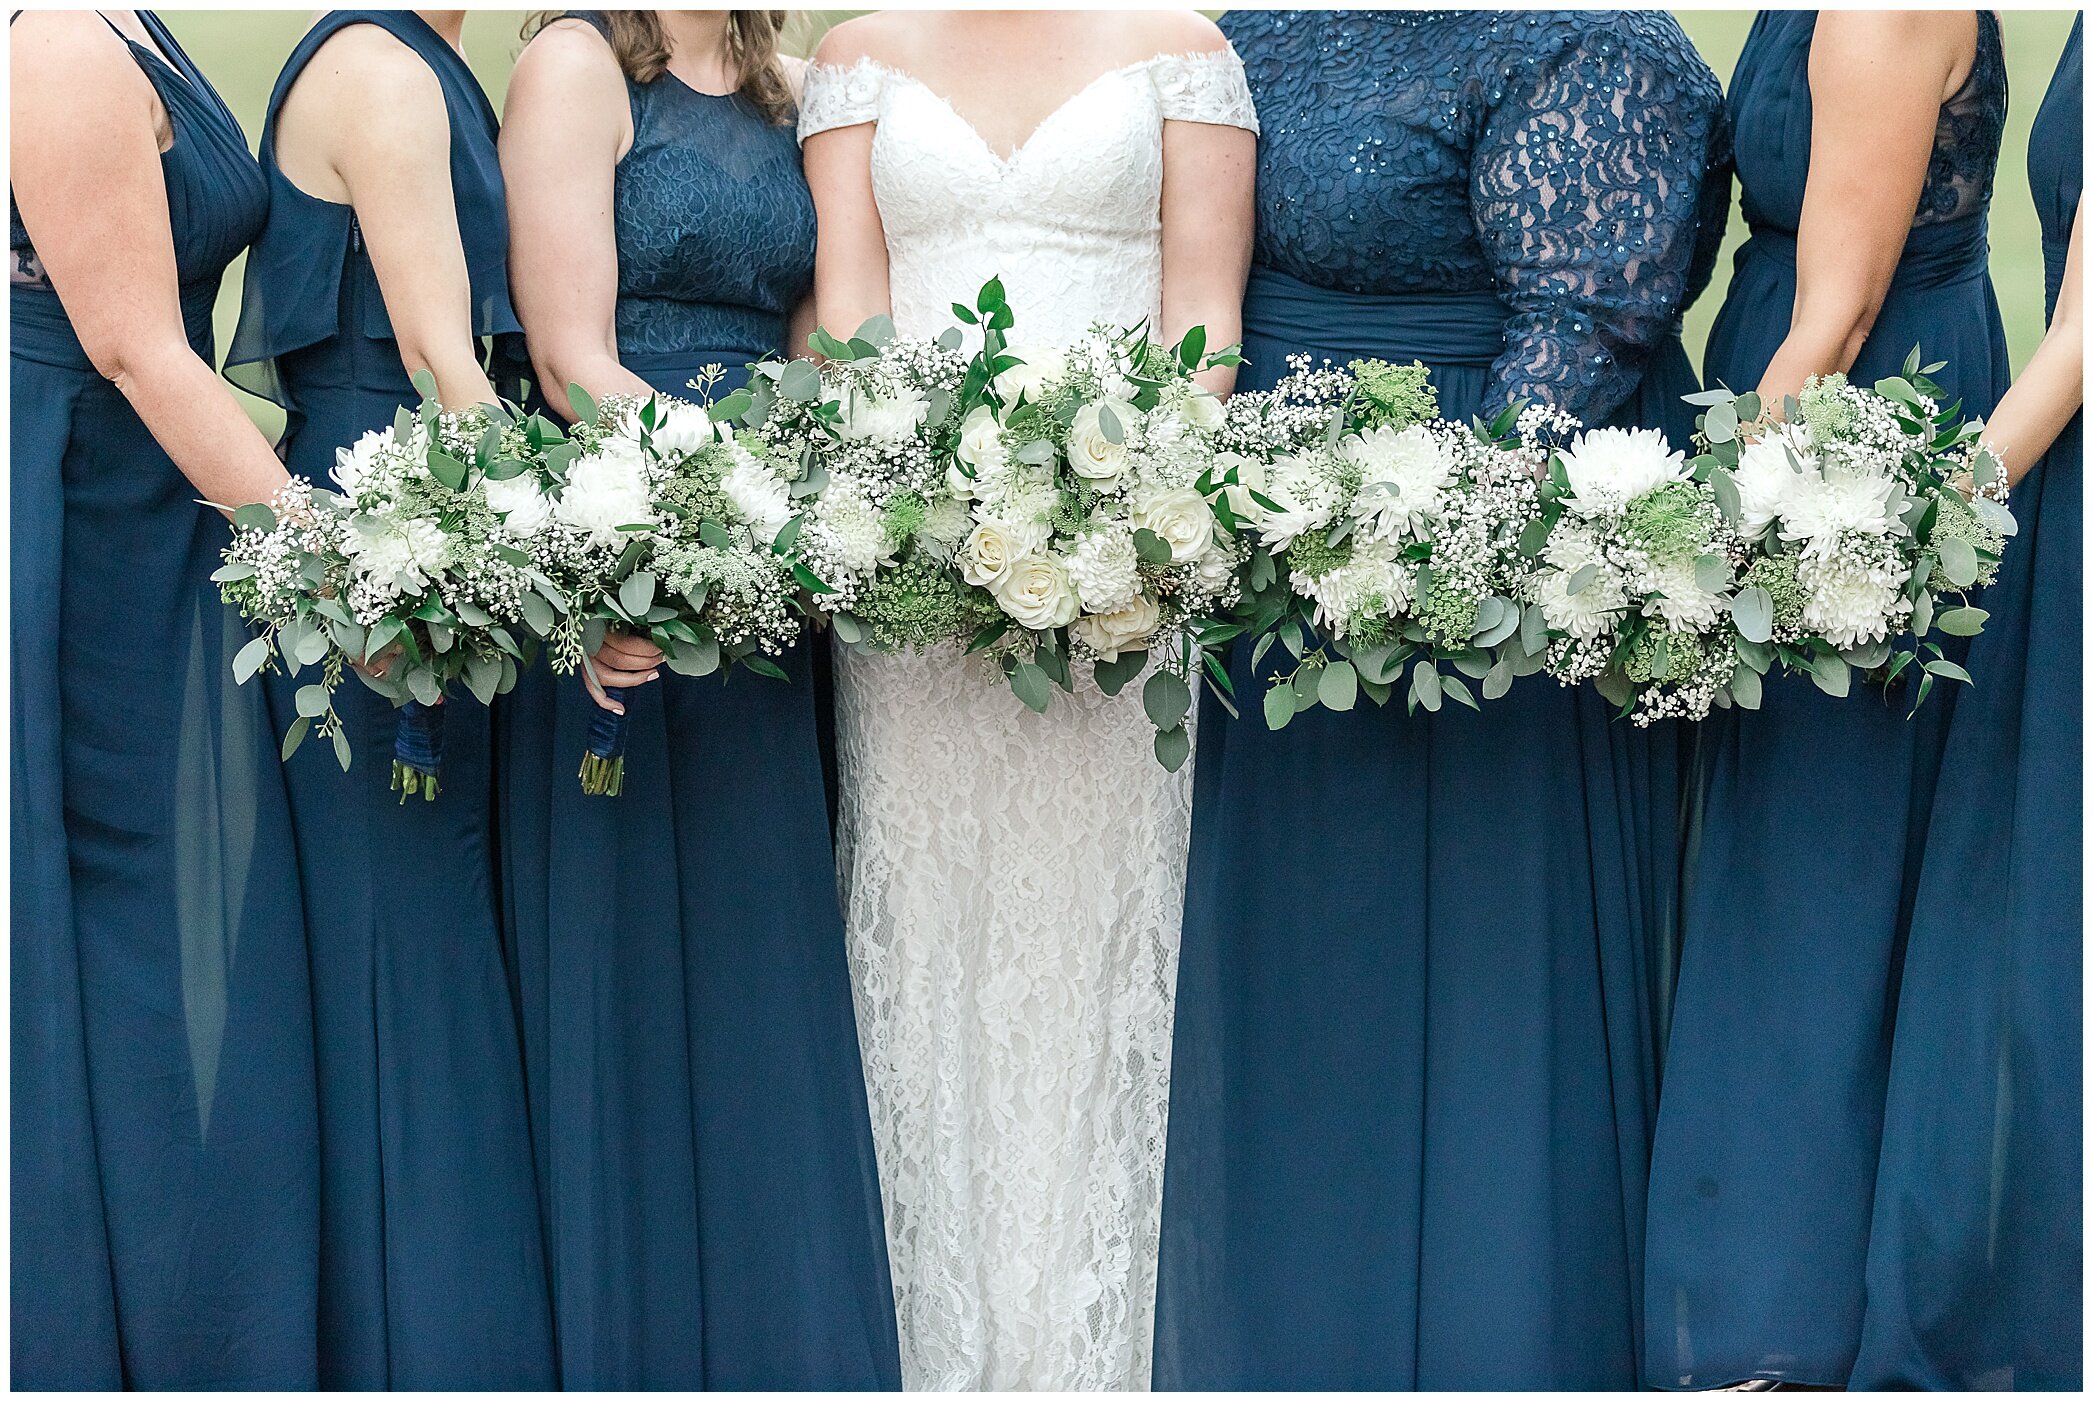 bridesmaids with ivory flowers and navy gowns pose with bride